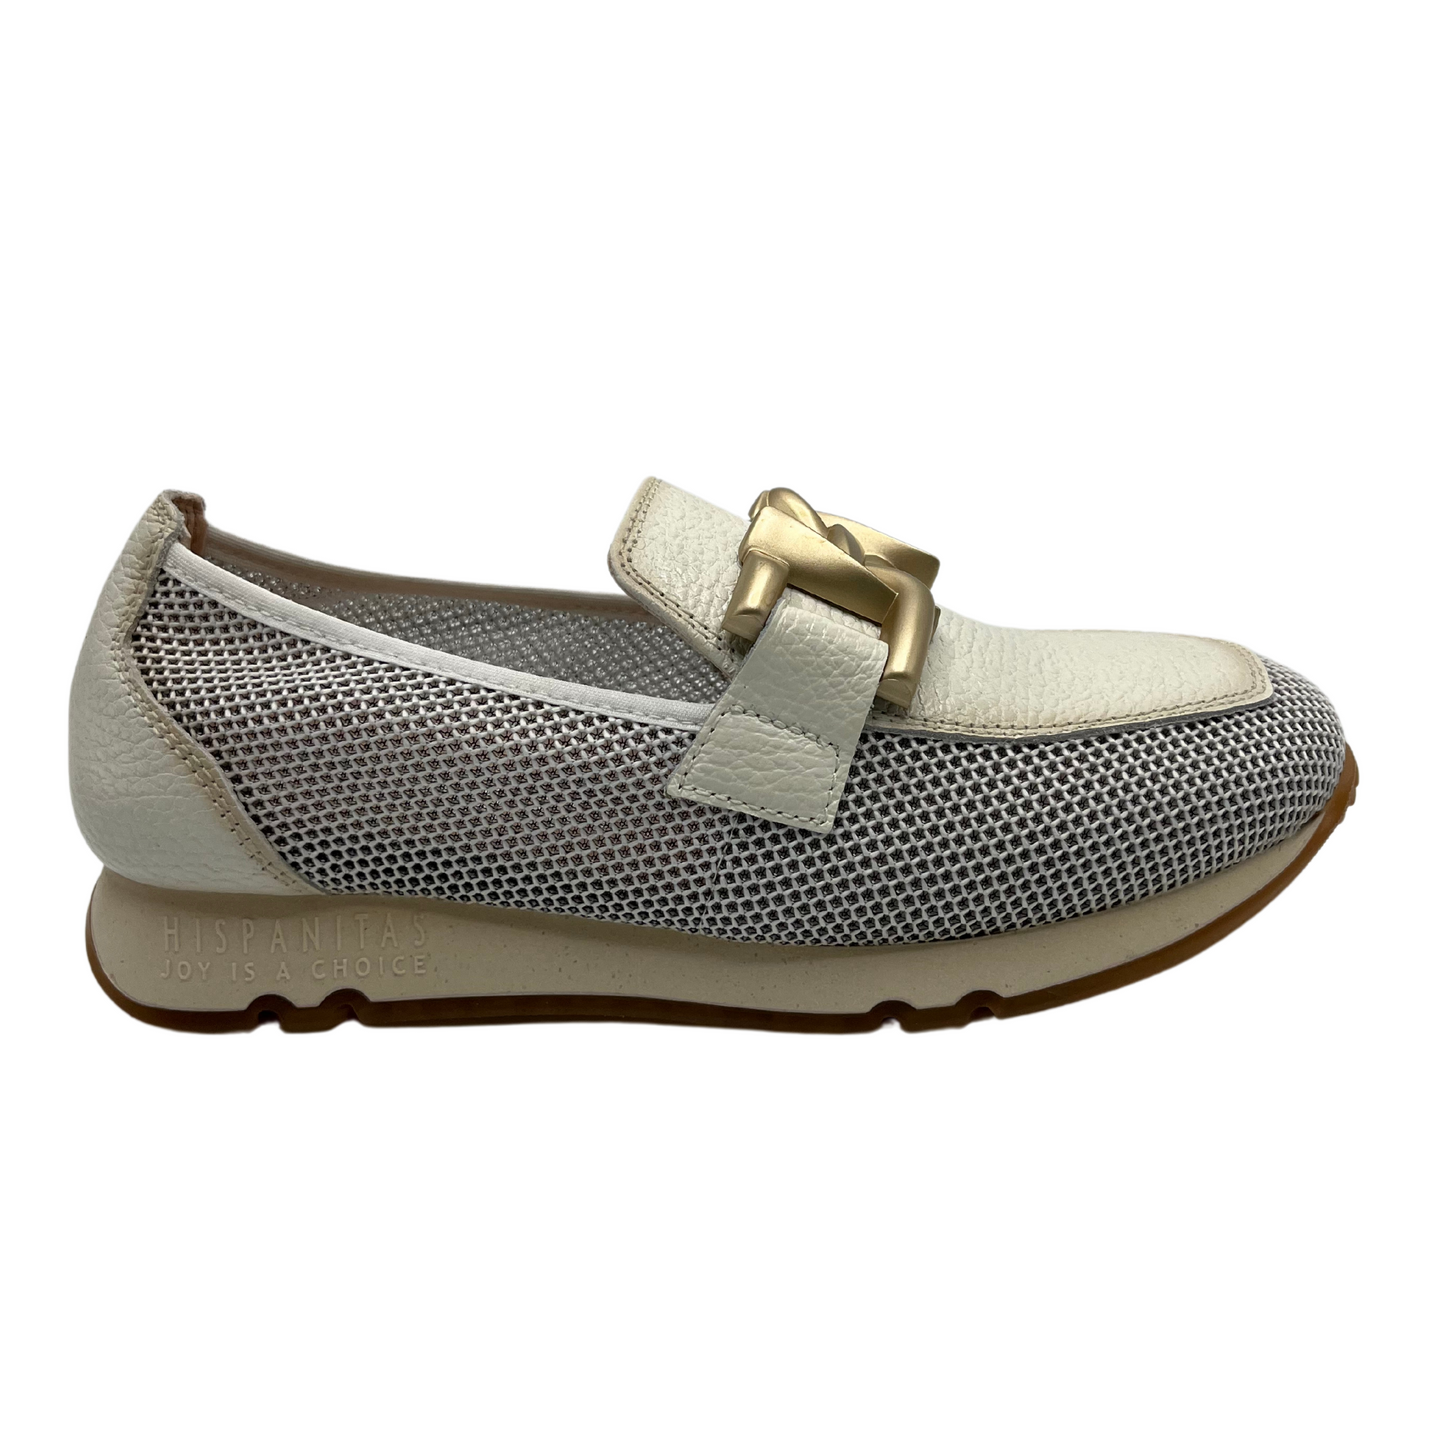 Right facing view of white coloured loafer sneaker with mesh sides, white rubber sole and gold detail on upper